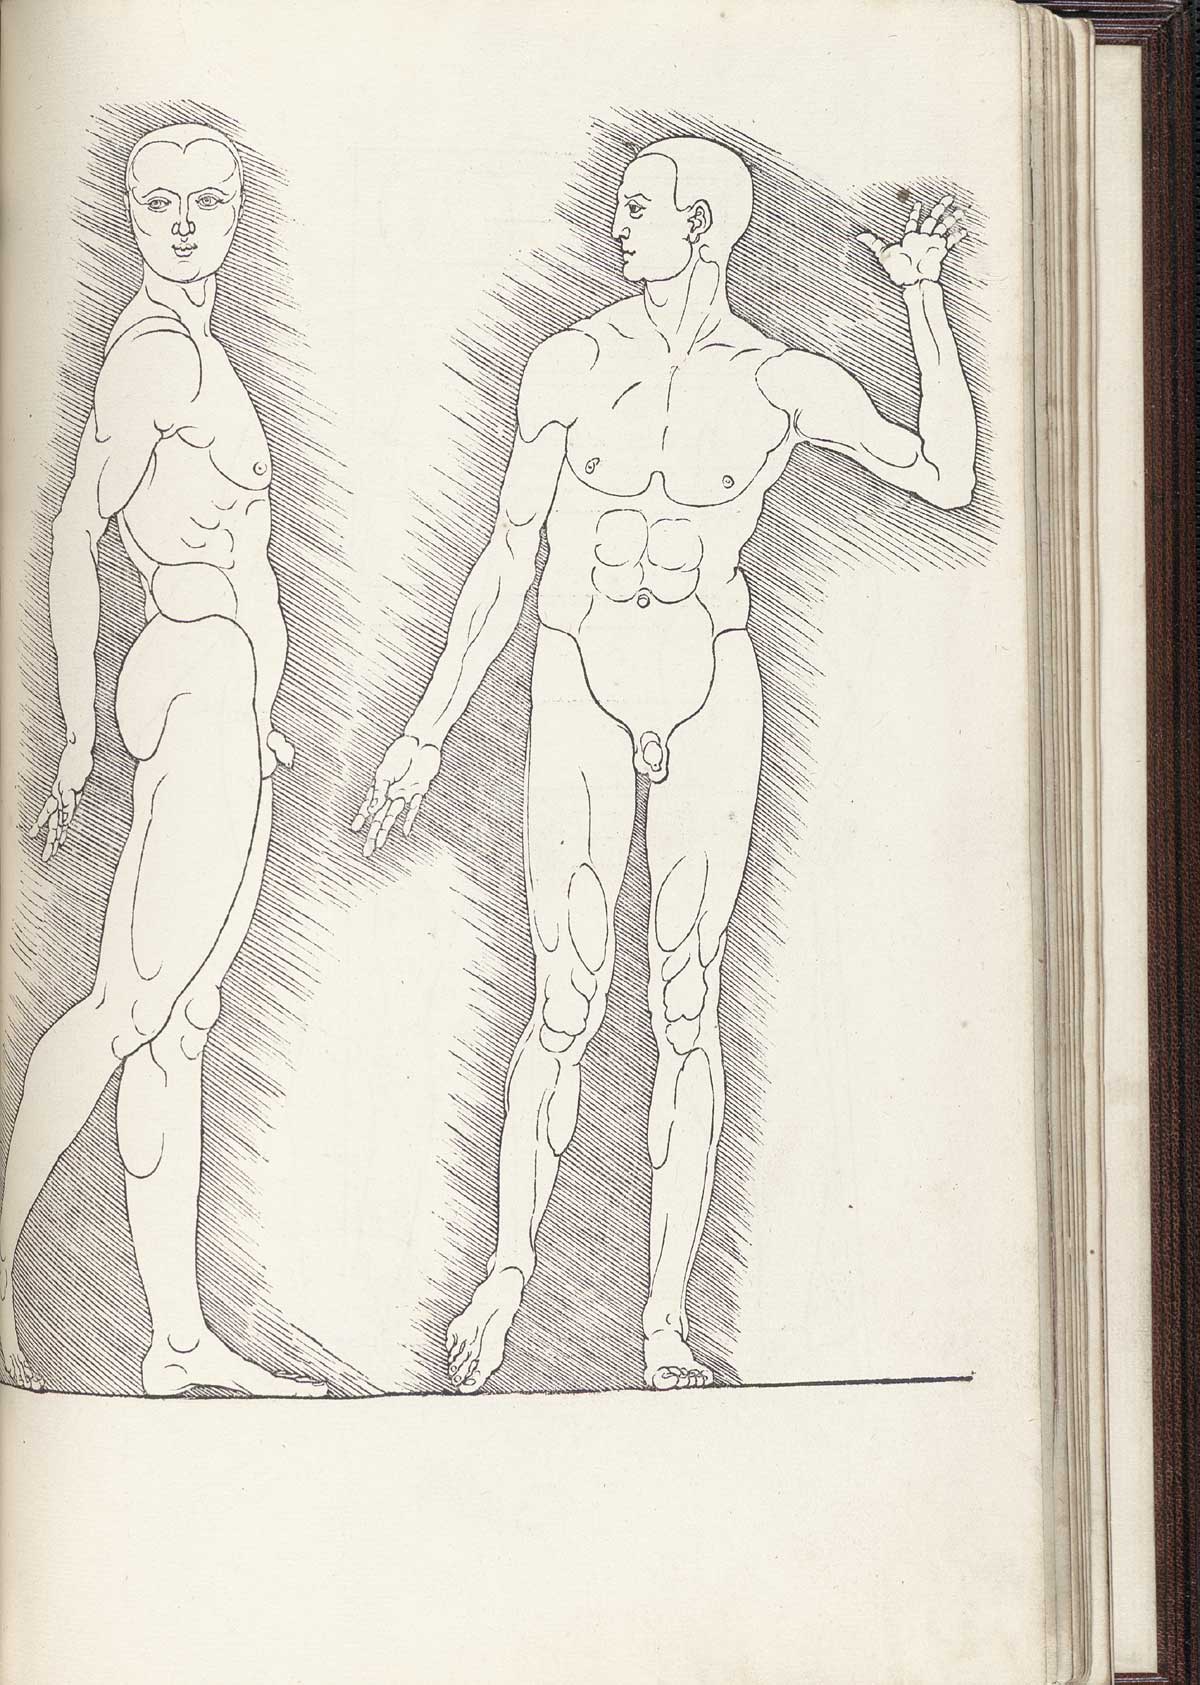 Woodcut image of two thin walking nude male figures, the one on the right with body facing the viewer but looking to the left and the one on the left in profile walking to the right but facing the viewer, both with diagonal background hatching around the perimeter, from Albrecht Dürer’s Vier Bücher von menschlicher Proportion, NLM Call no. WZ 240 D853v 1528.